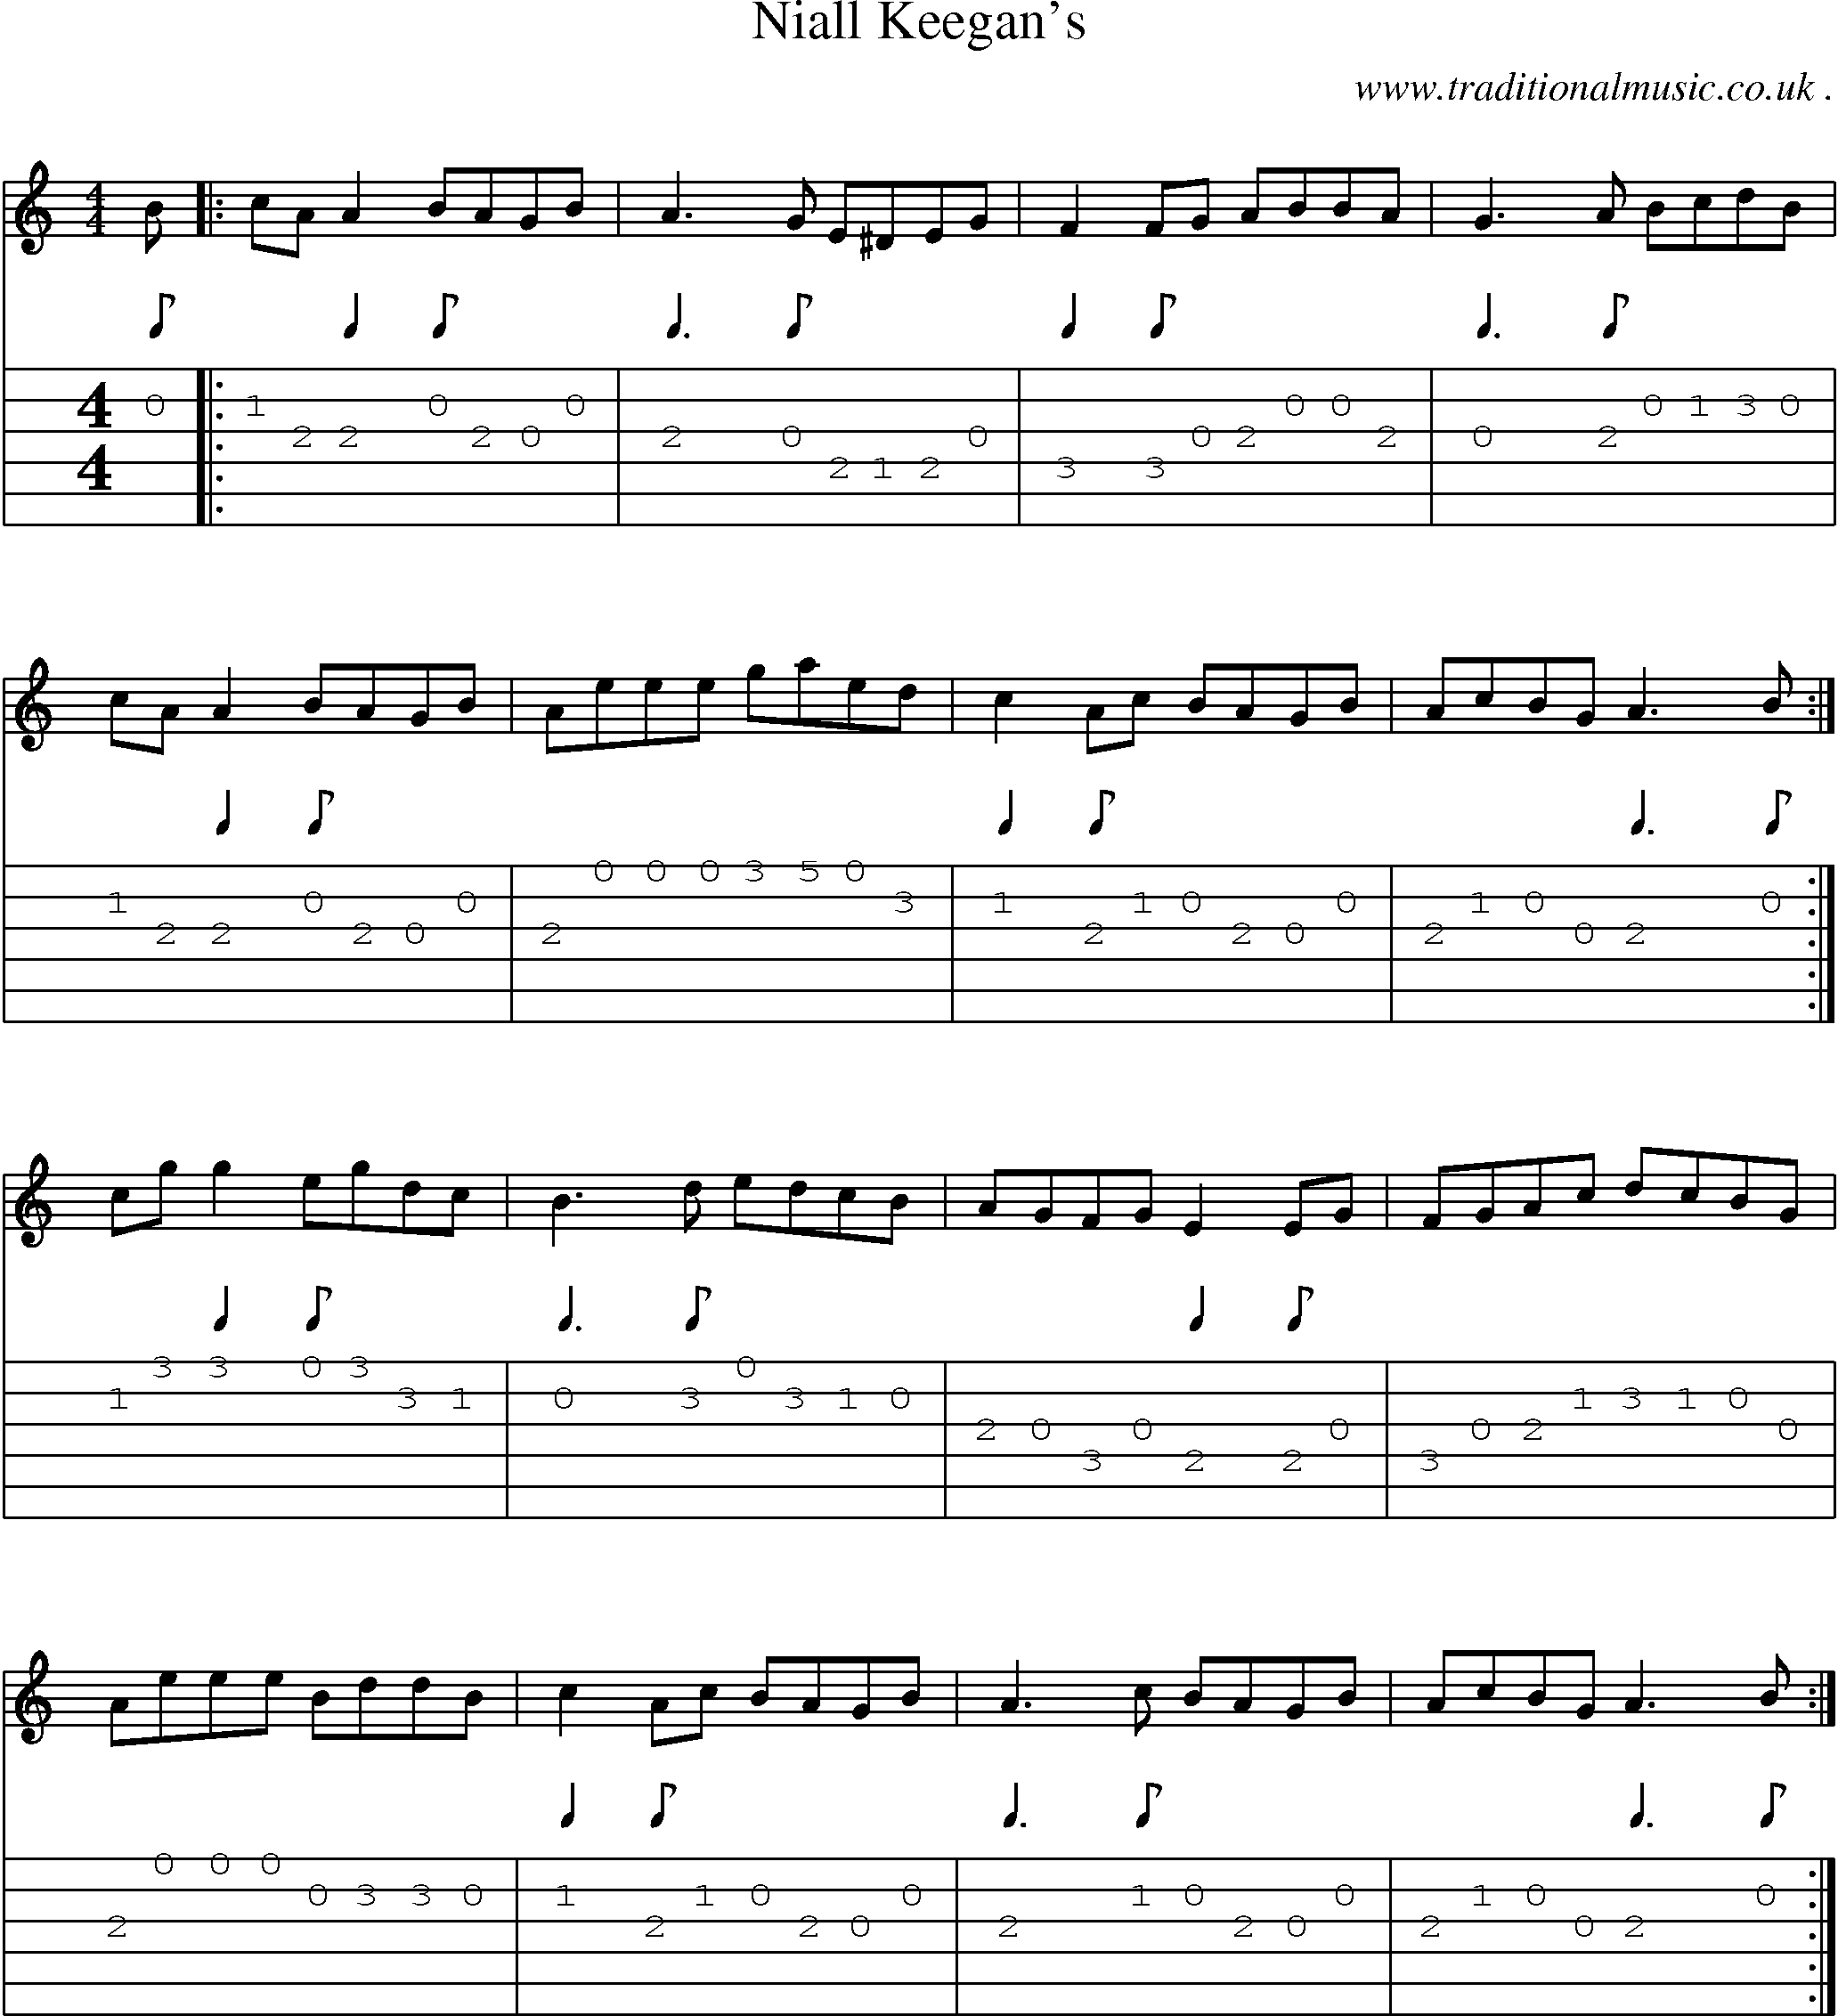 Sheet-Music and Guitar Tabs for Niall Keegans